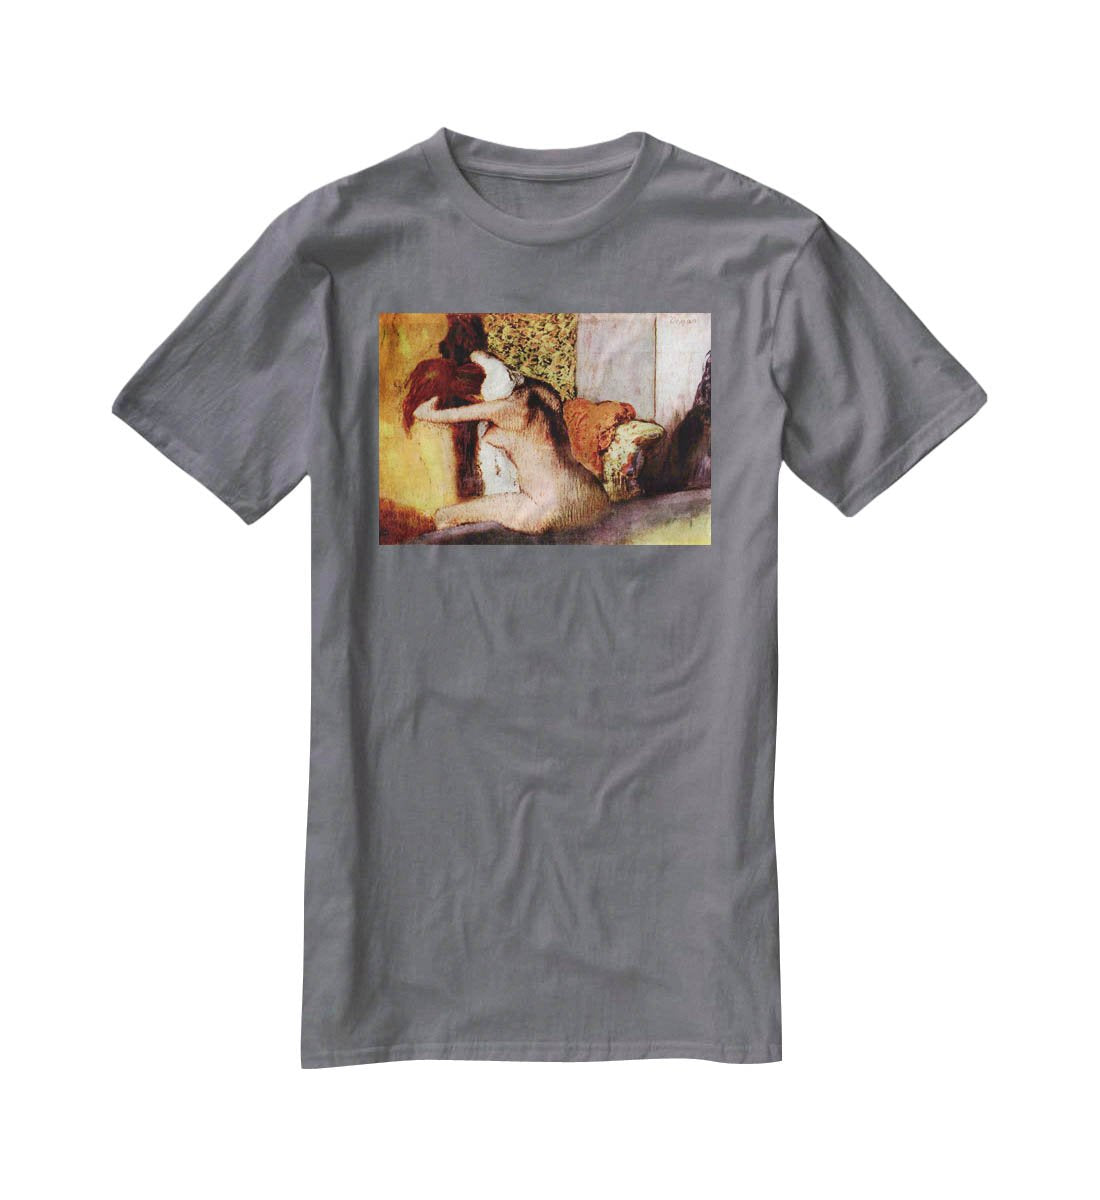 After bathing 2 by Degas T-Shirt - Canvas Art Rocks - 3